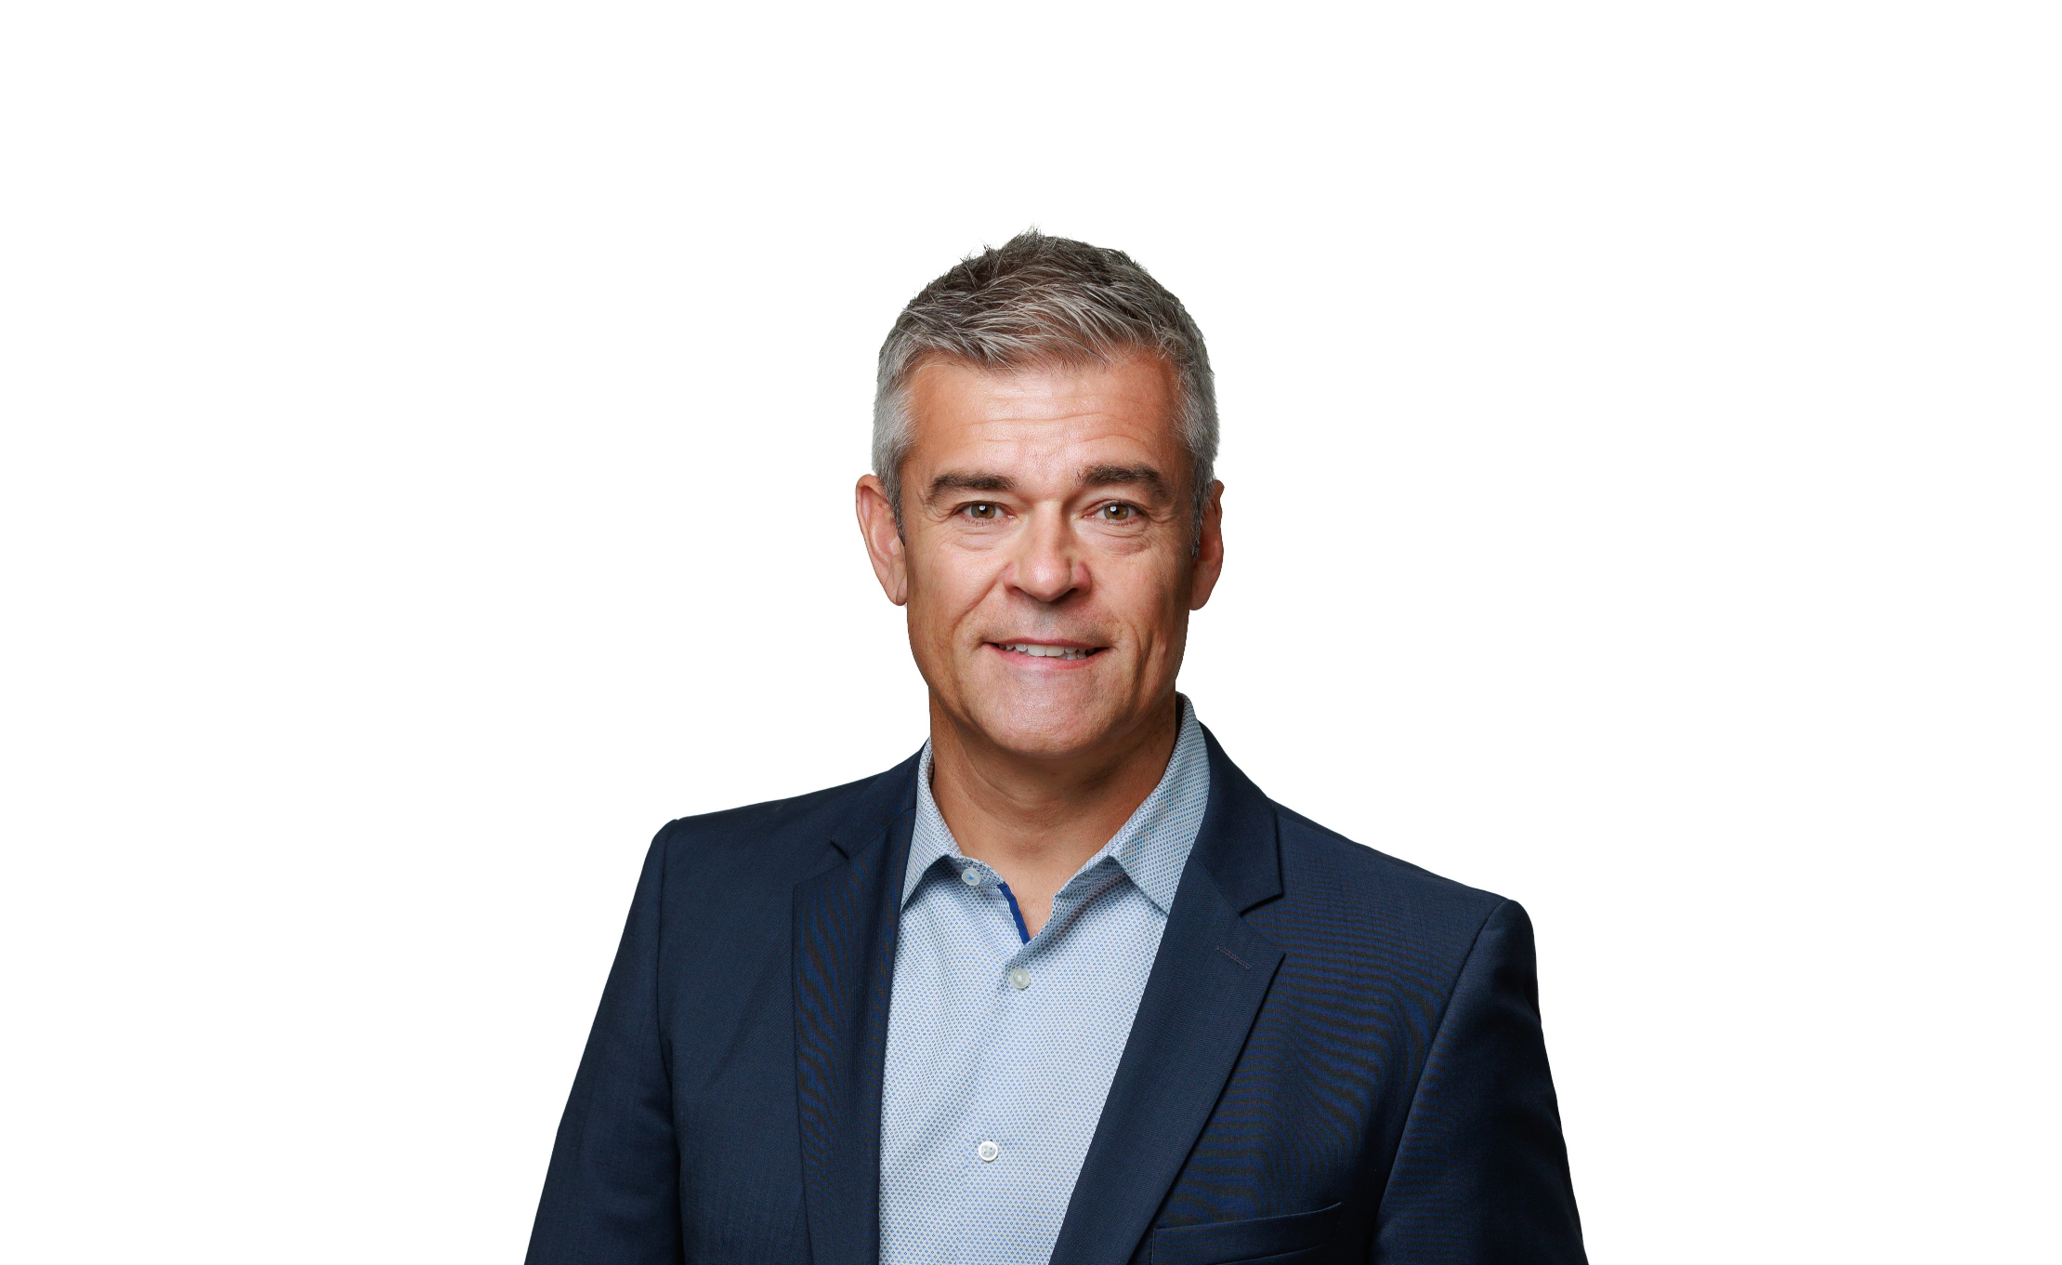 Lactalis Canada Announces Appointment of Tom Szostok as Senior Vice President of Sales